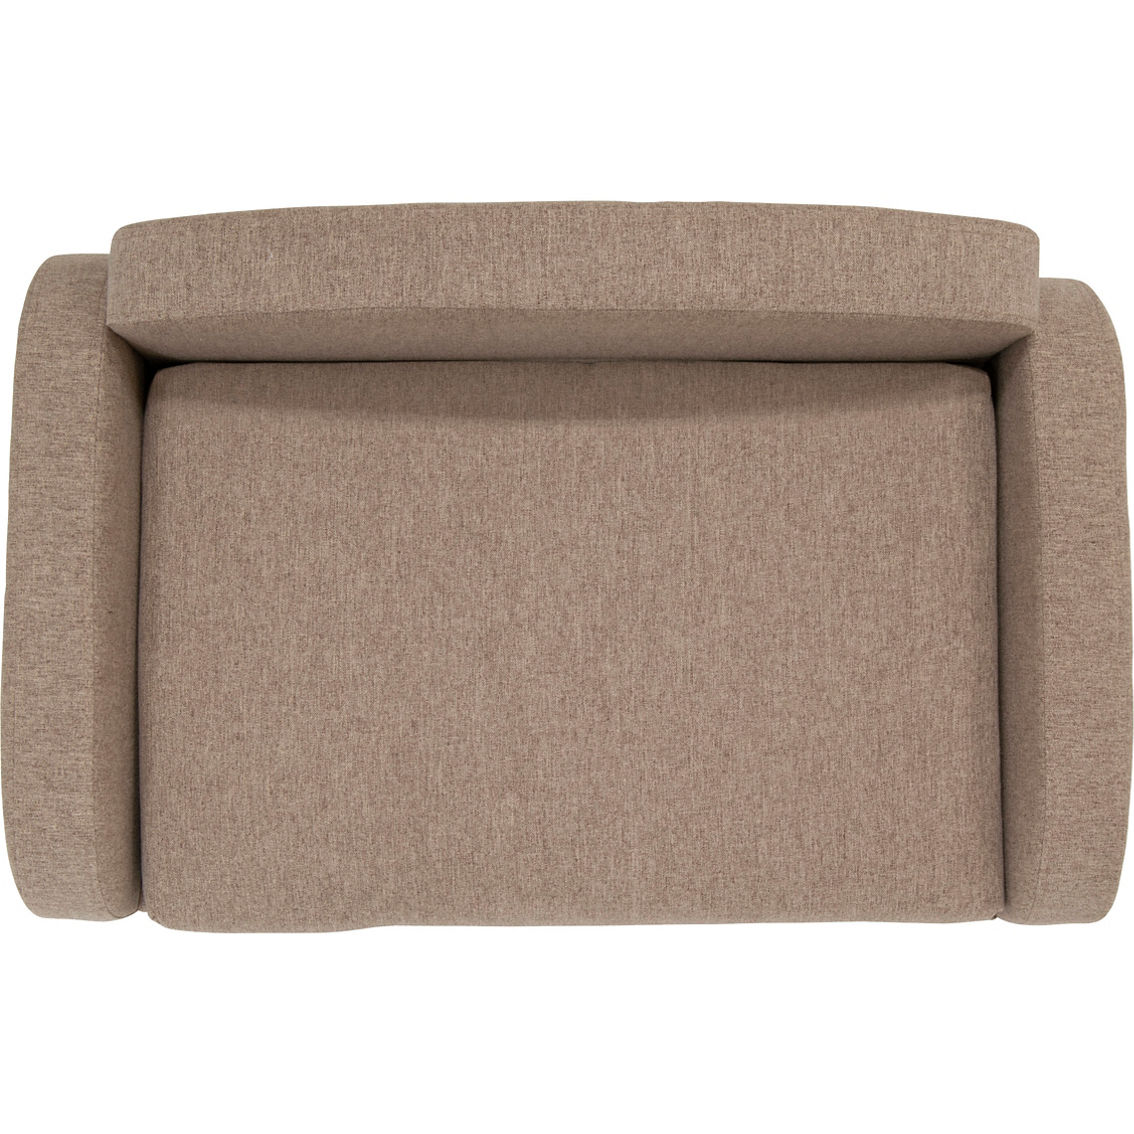 Studio Designs Paws and Purrs Pet Sofa Small - Image 8 of 9